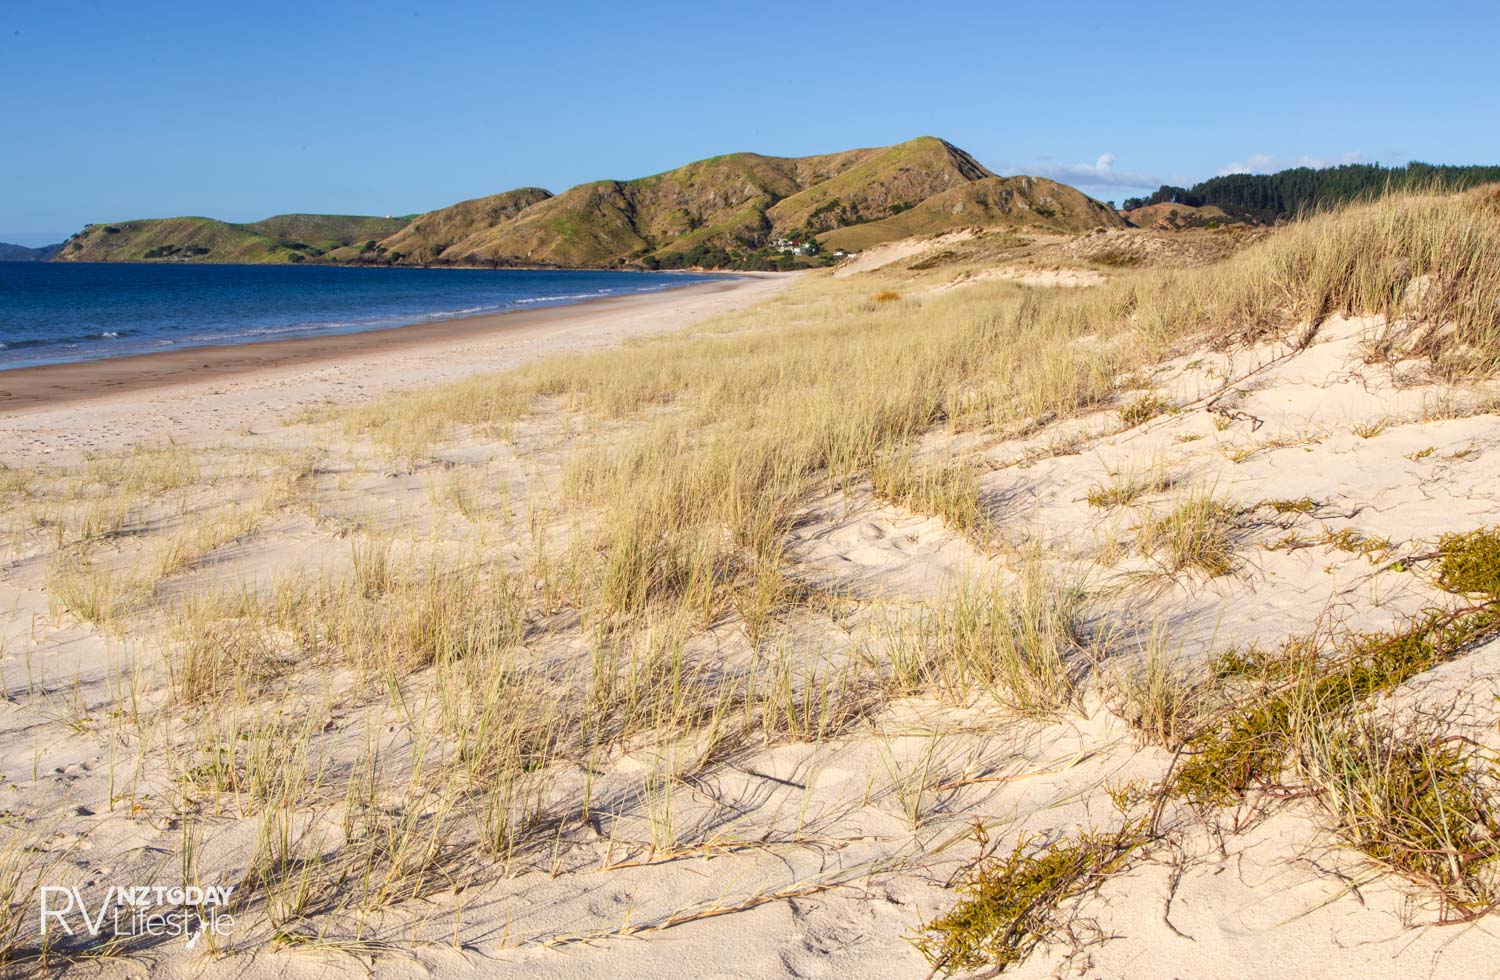 Otama Beach is one of the many white-sand beaches to explore within an hour’s drive of Whitianga